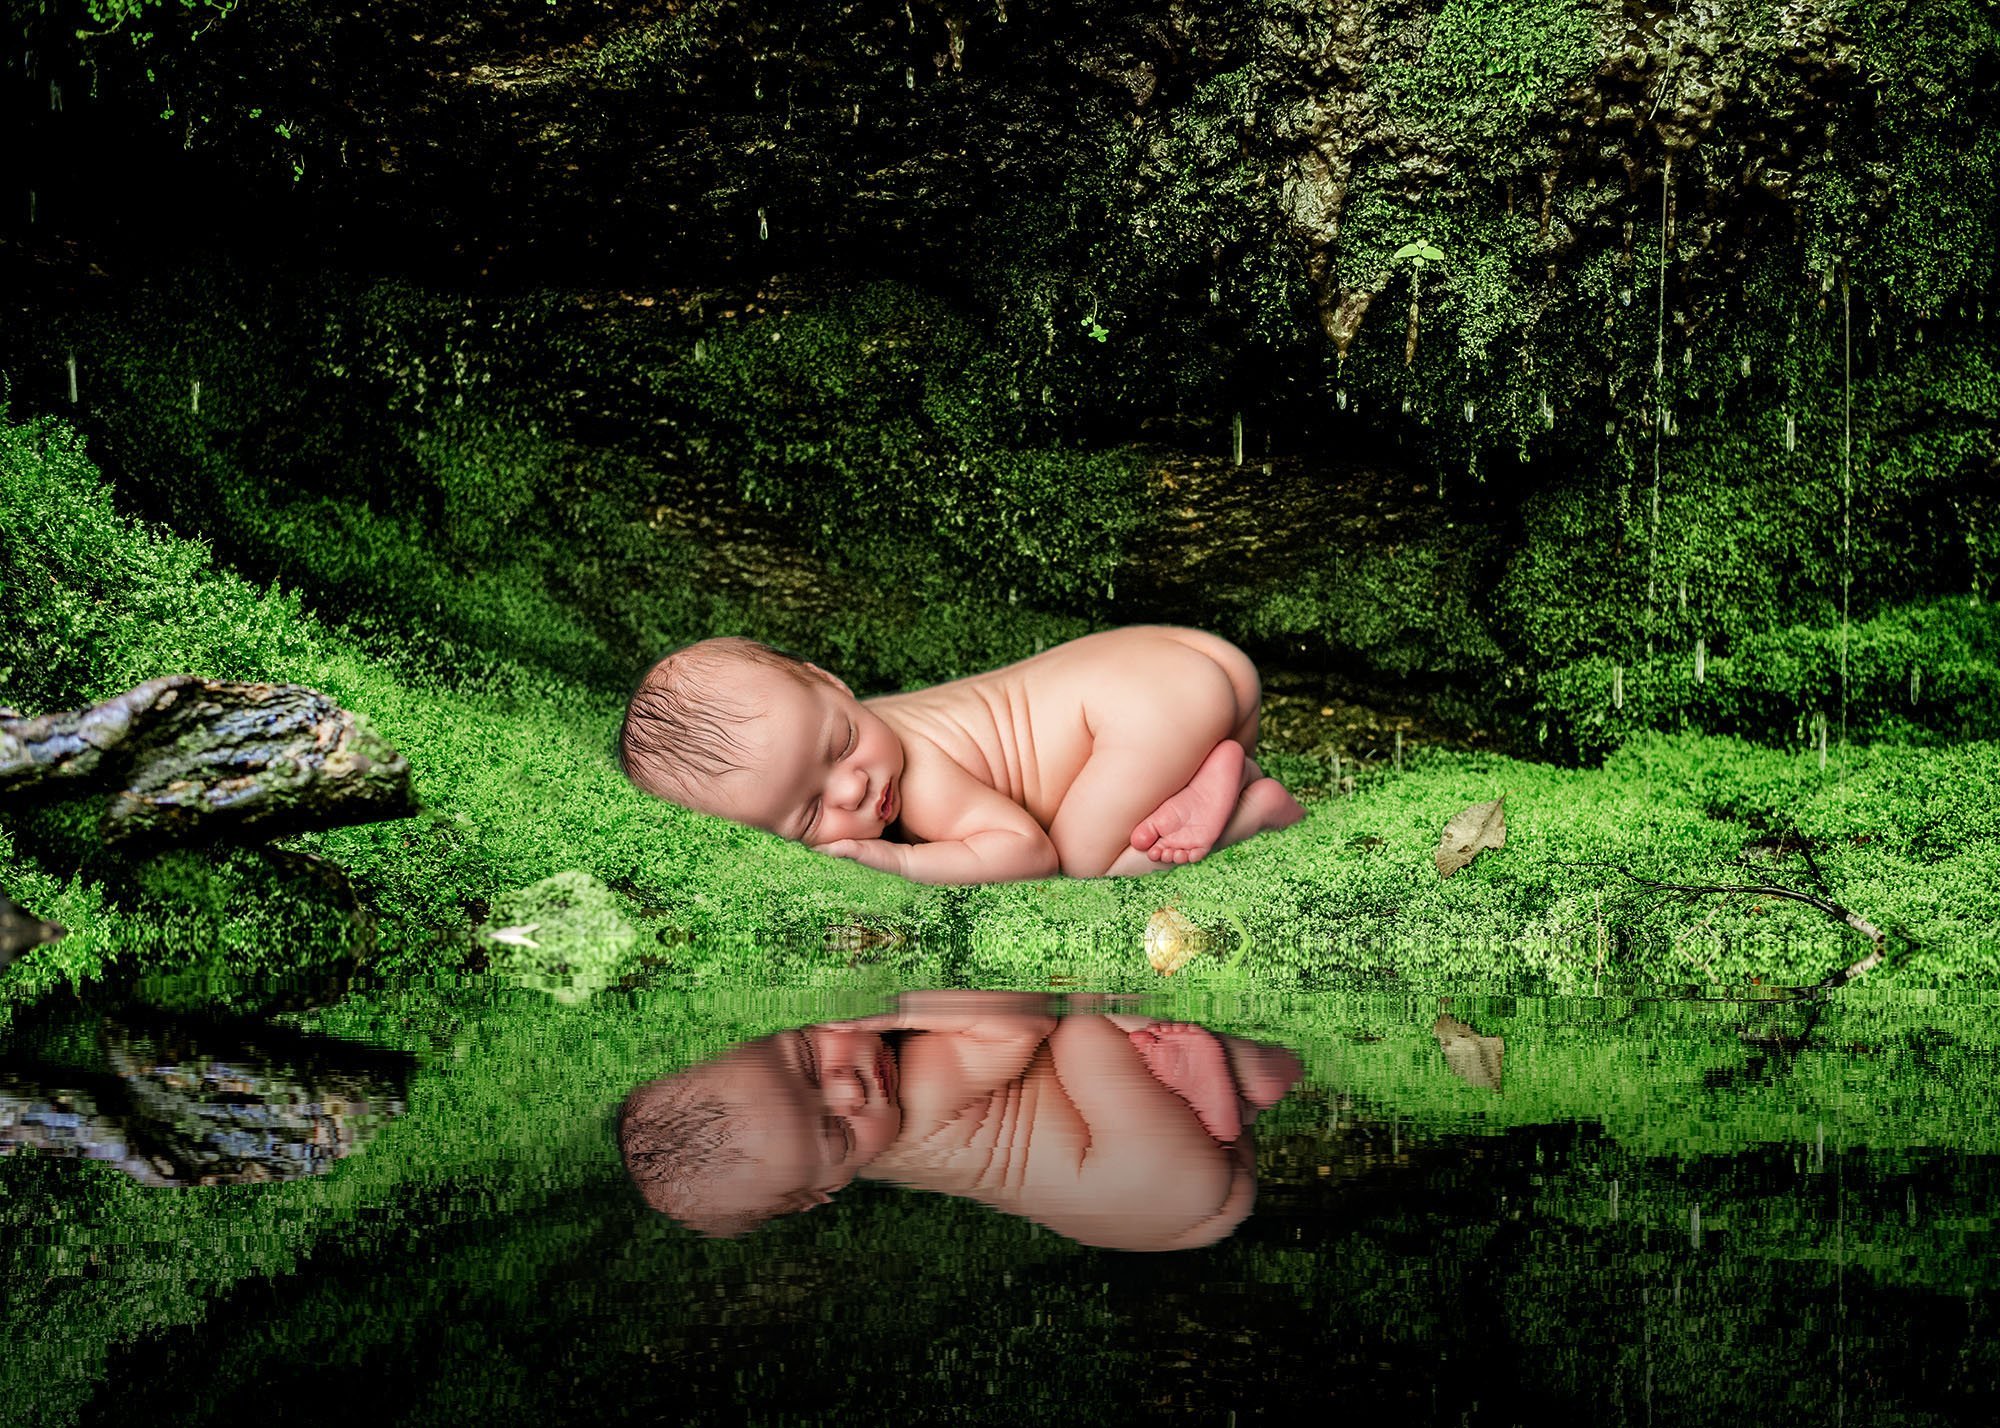 newborn baby composite into forest glen by water